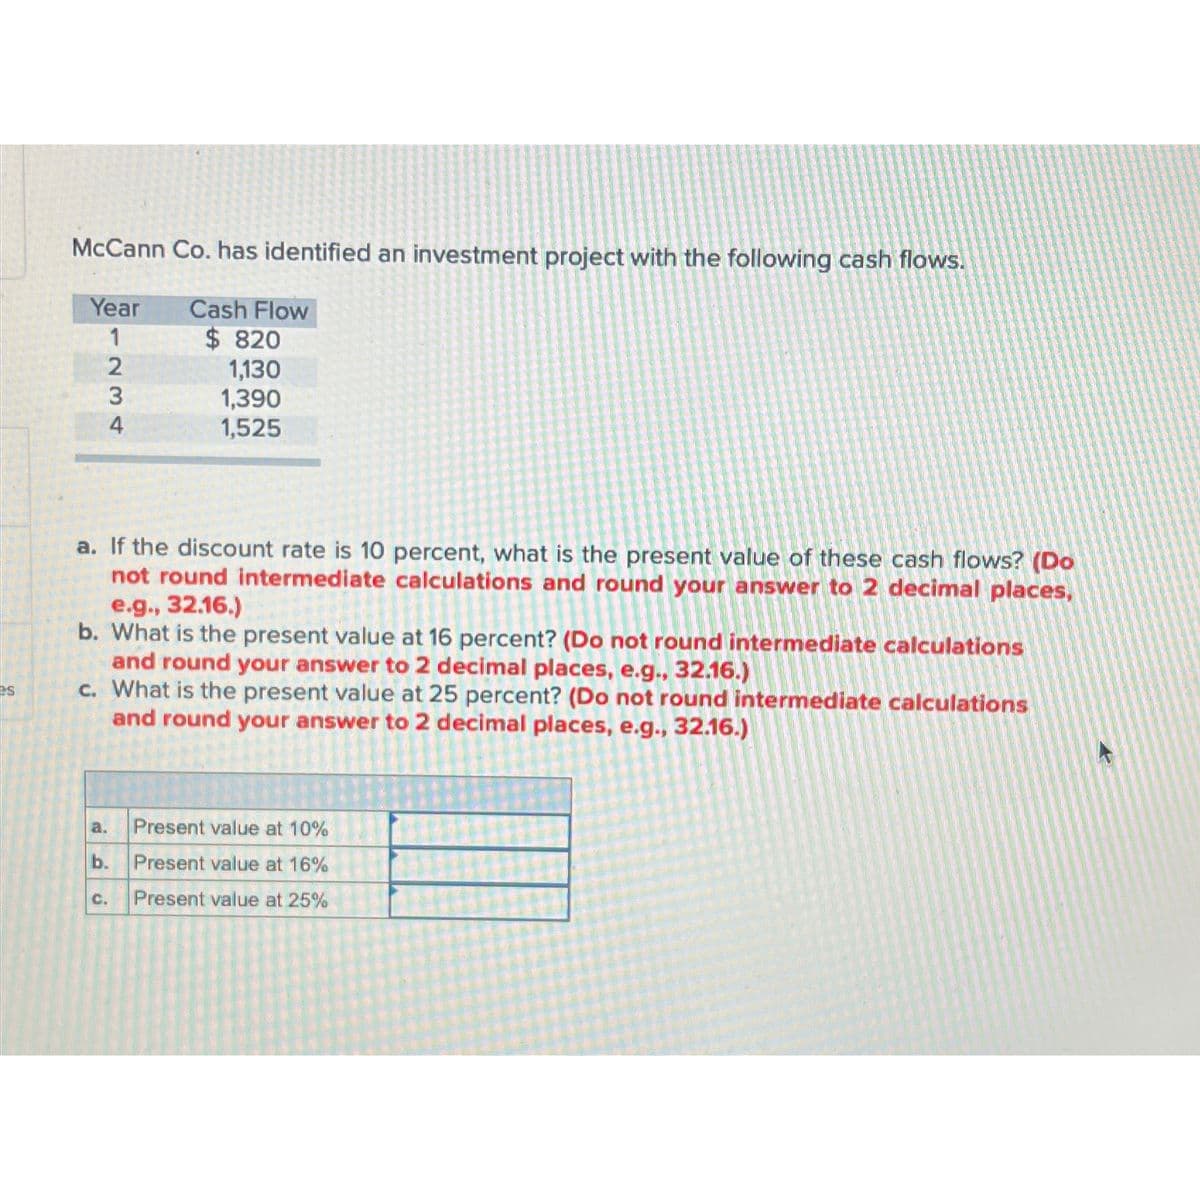 es
McCann Co. has identified an investment project with the following cash flows.
Year
1
234
a. If the discount rate is 10 percent, what is the present value of these cash flows? (Do
not round intermediate calculations and round your answer to 2 decimal places,
e.g., 32.16.)
b. What is the present value at 16 percent? (Do not round intermediate calculations
and round your answer to 2 decimal places, e.g., 32.16.)
c. What is the present value at 25 percent? (Do not round intermediate calculations
and round your answer to 2 decimal places, e.g., 32.16.)
a.
Cash Flow
$820
1,130
1,390
1,525
b.
C.
Present value at 10%
Present value at 16%
Present value at 25%